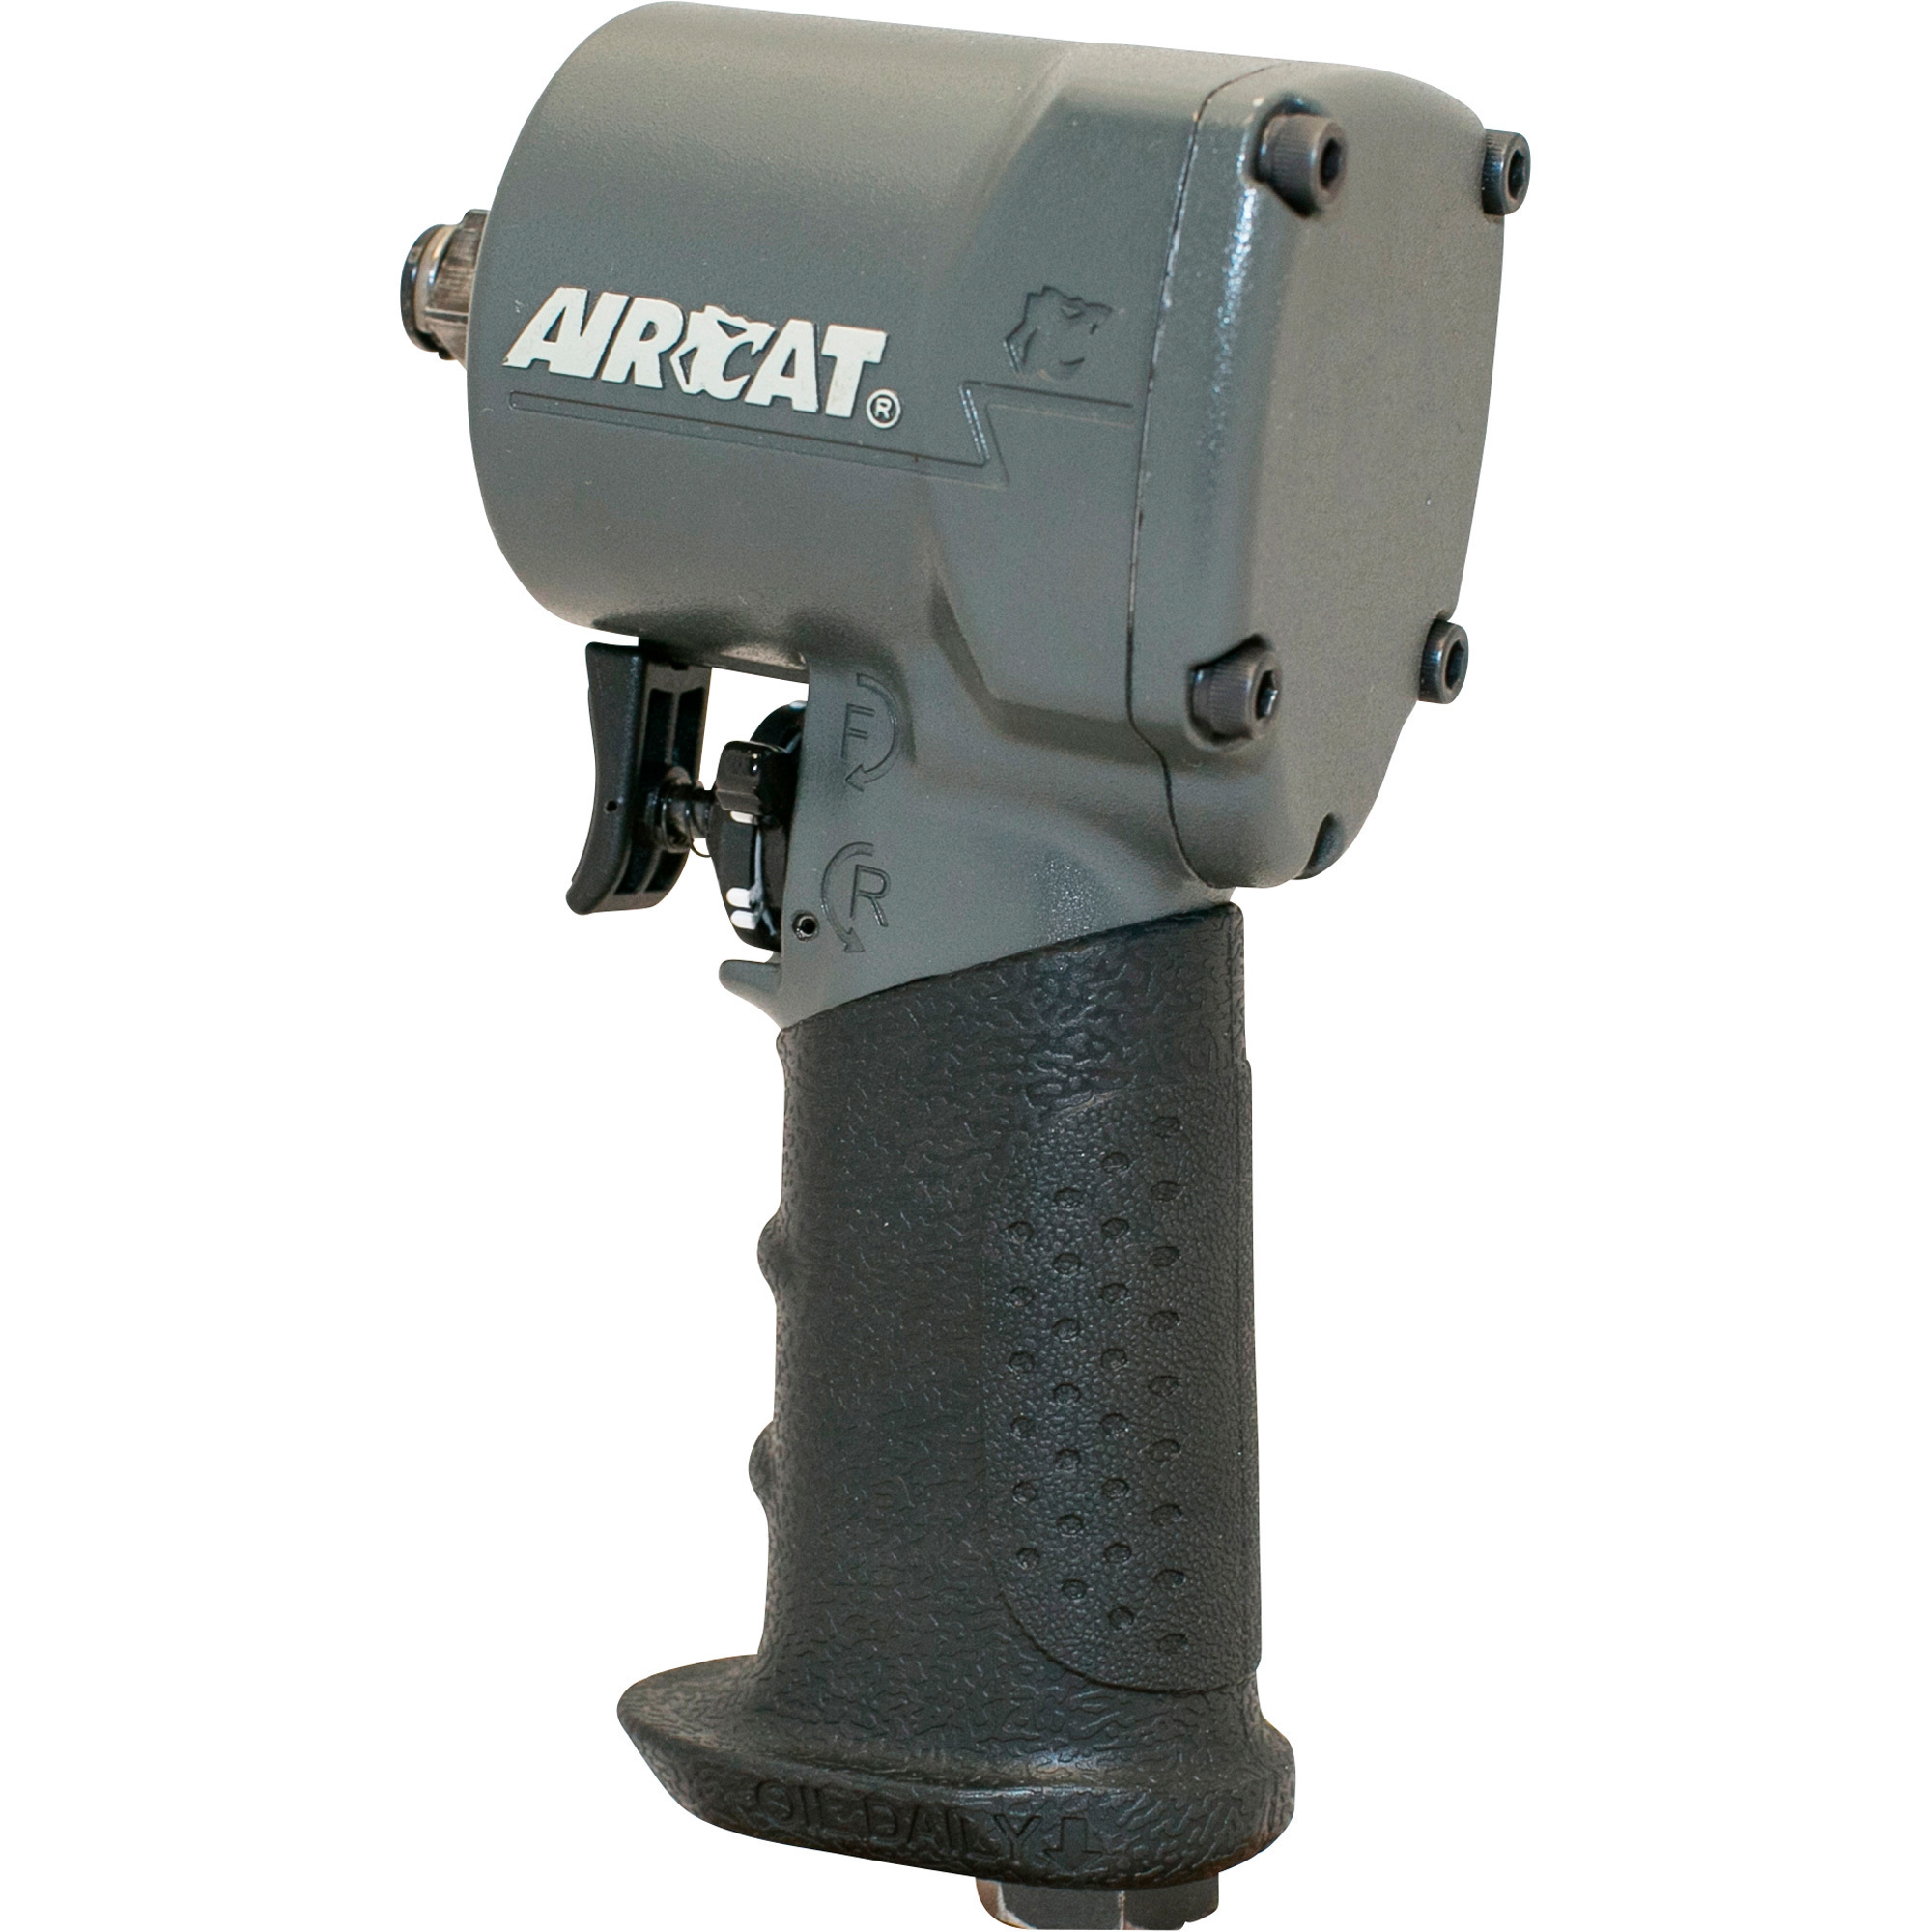 AIRCAT Compact Air Impact Wrench, 3/8Inch Drive, 700ft./lbs. Torque, Model 1077-TH